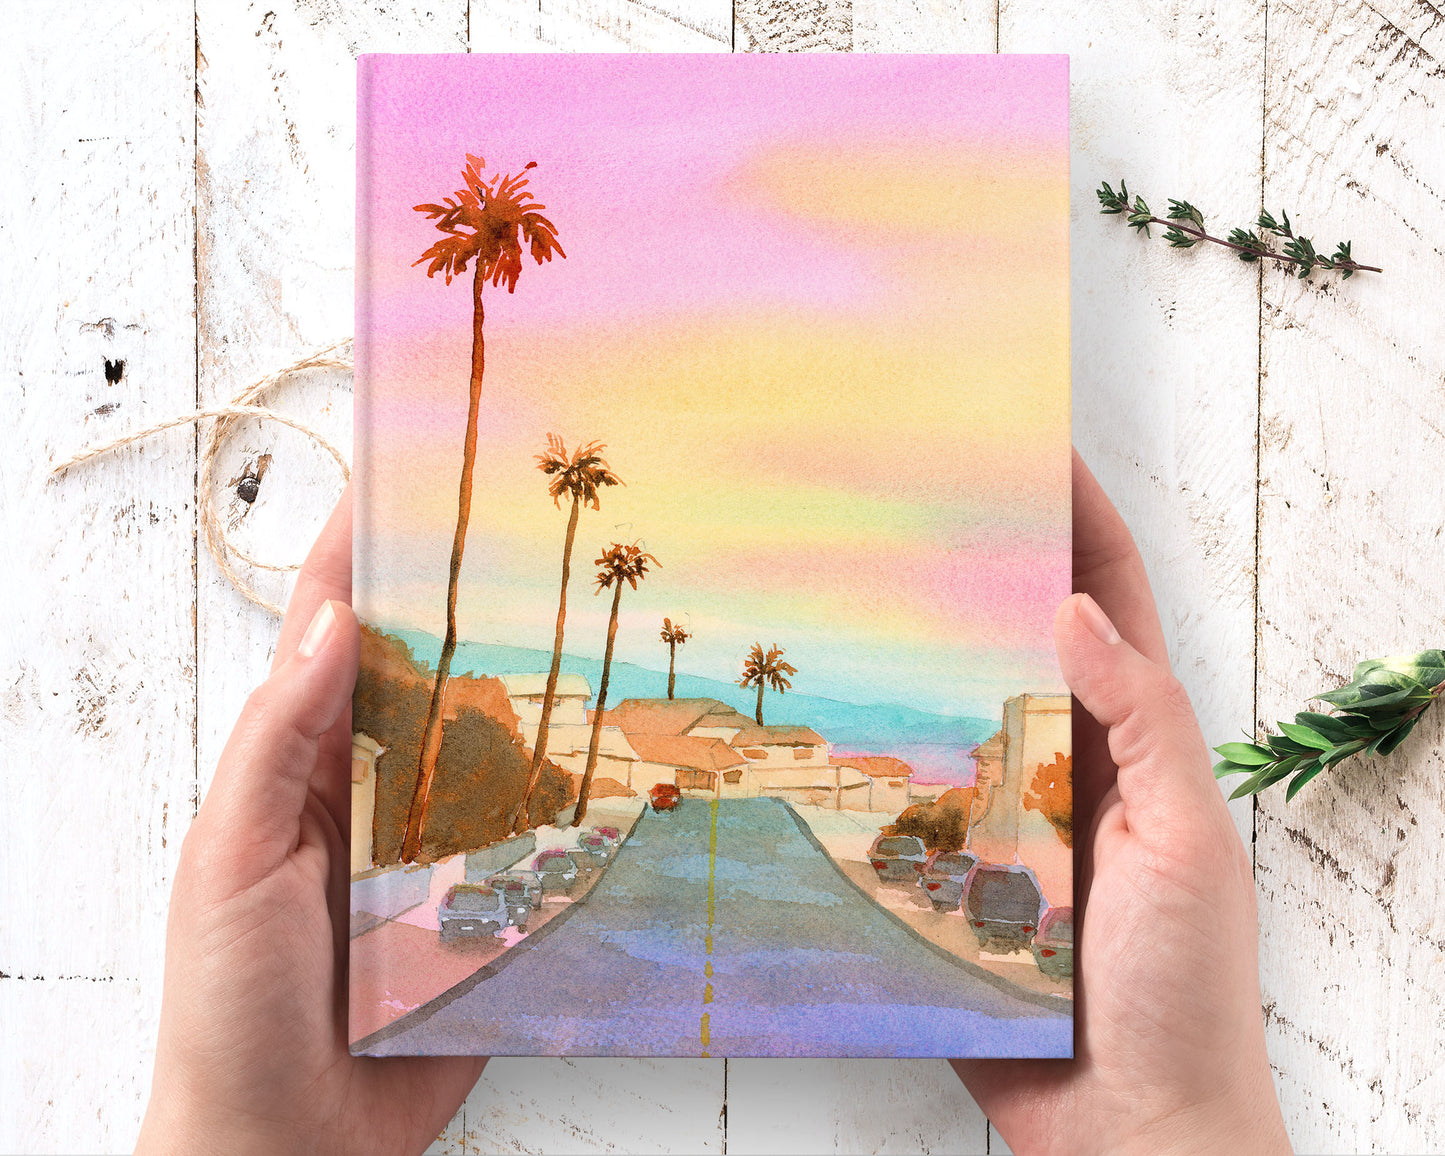 San Francisco Hardcover Writing Journal Notebook Lined